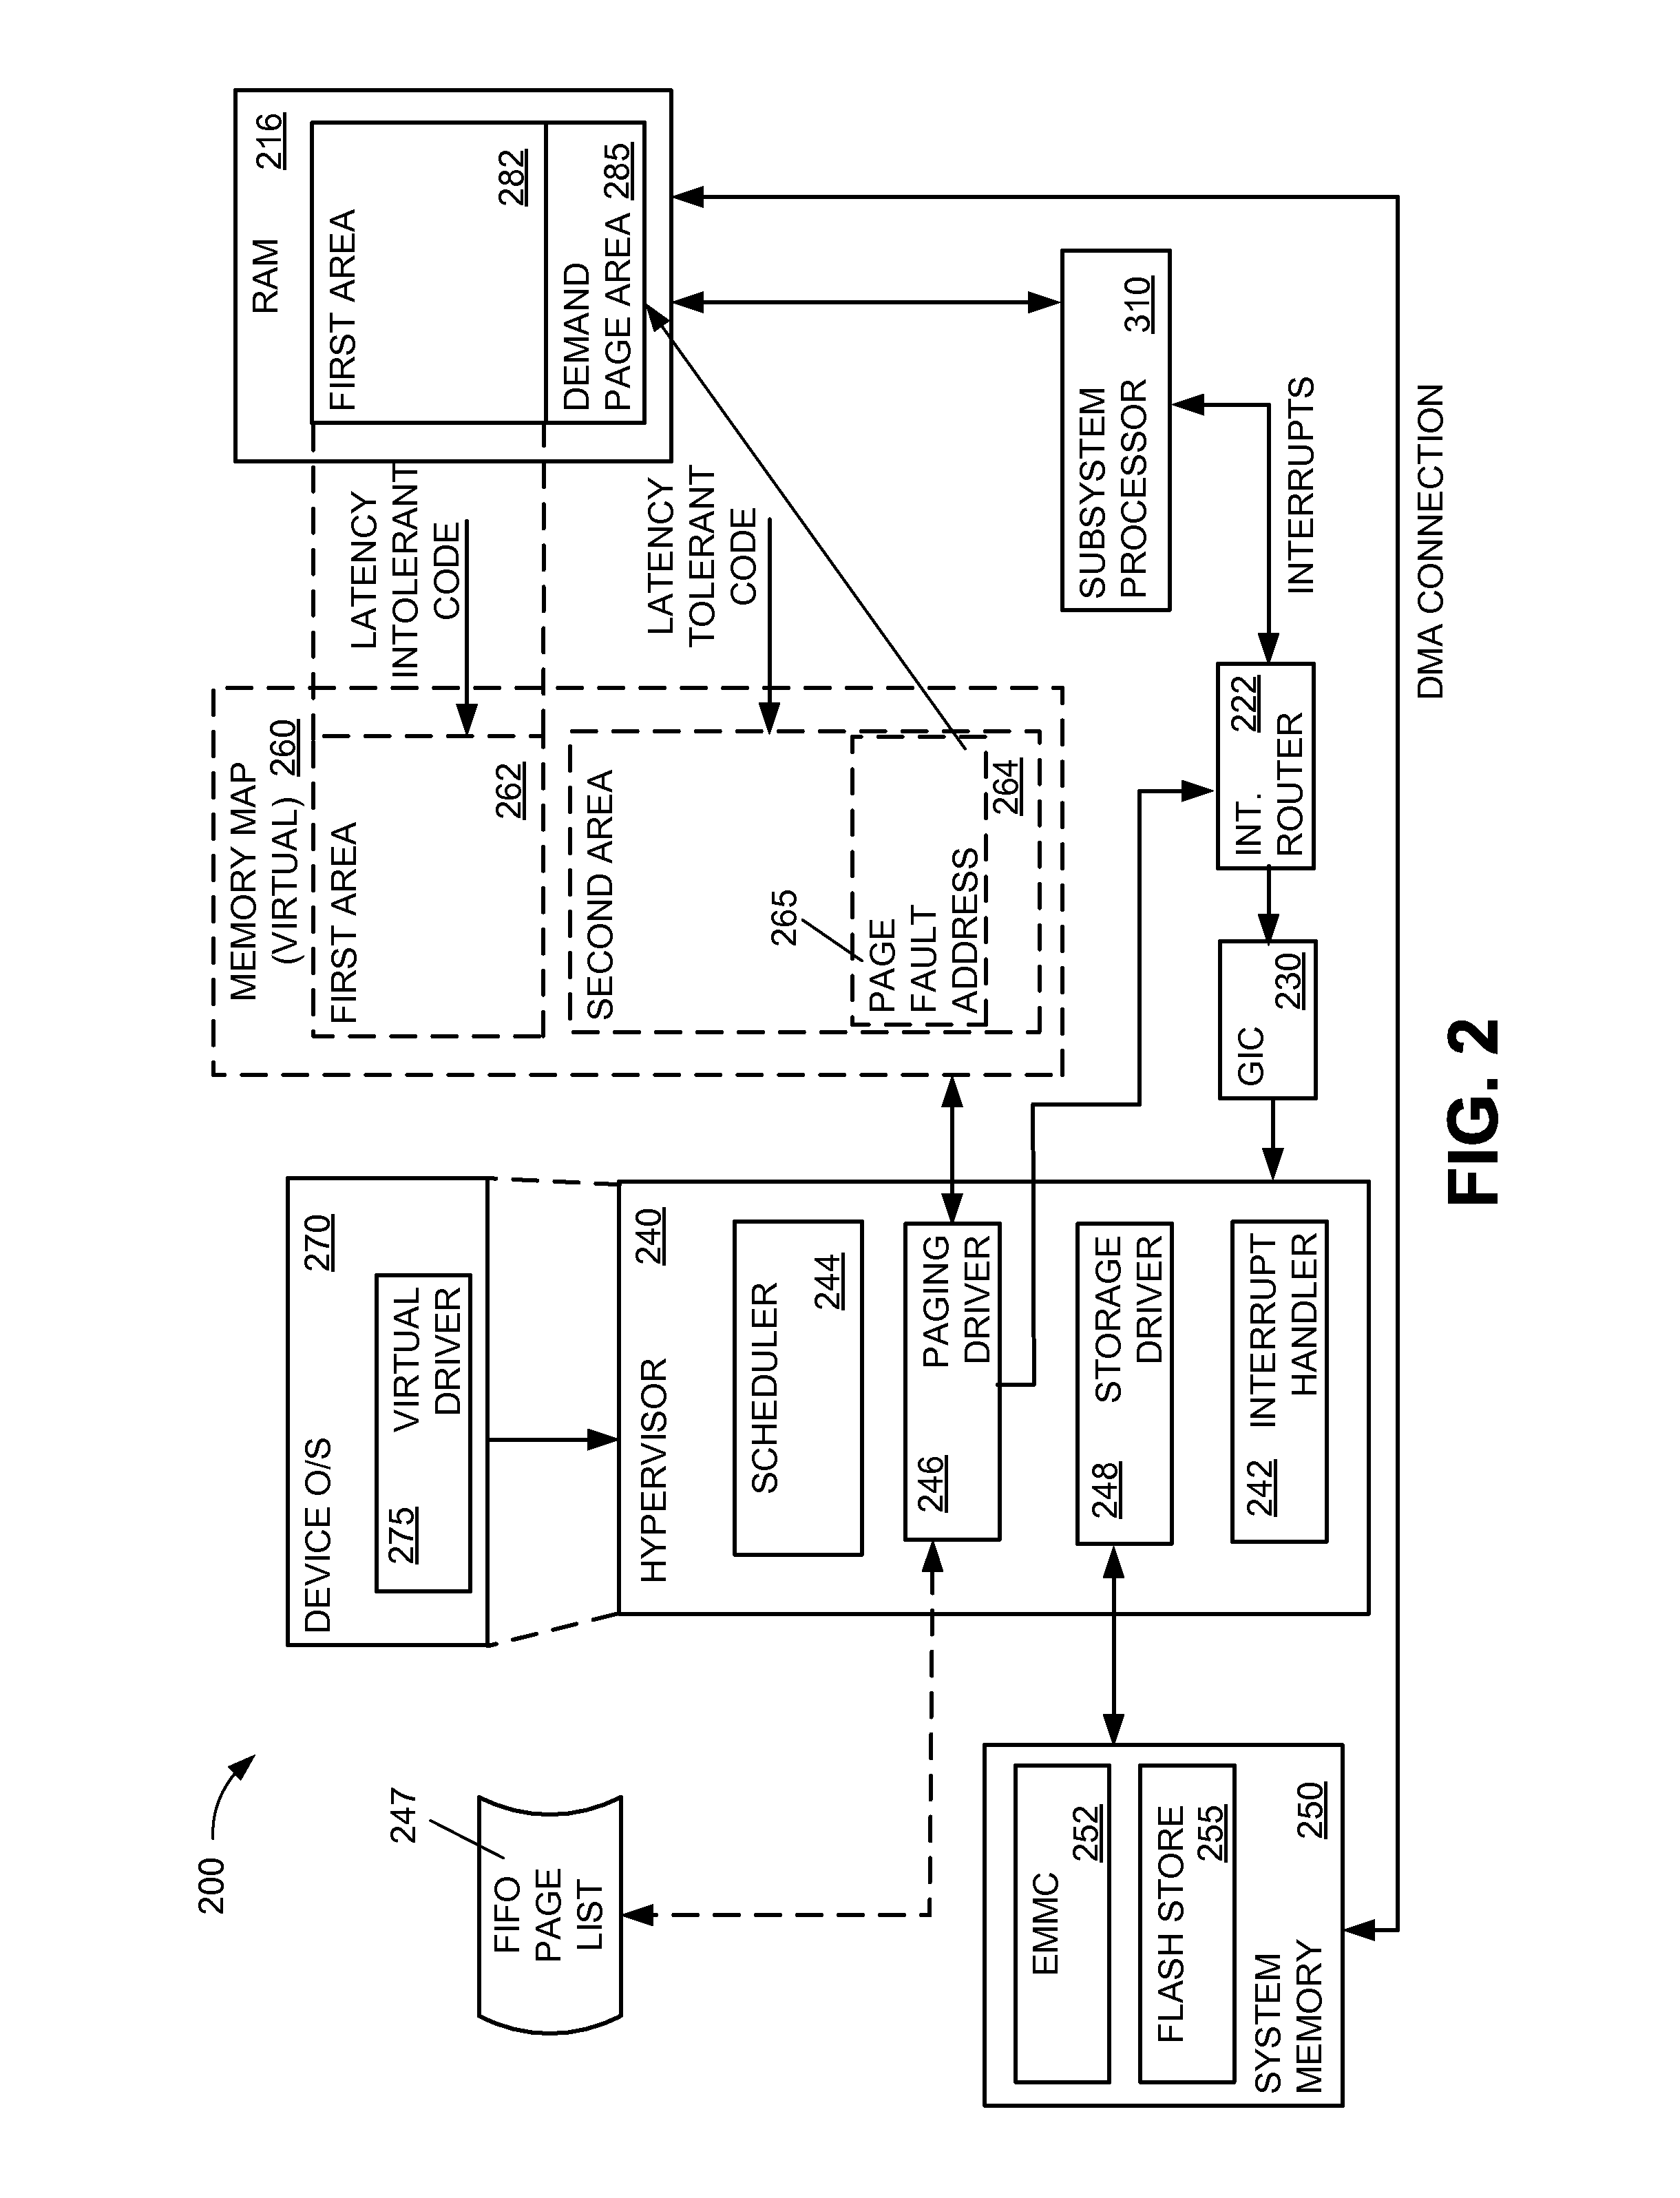 Systems and methods for supporting demand paging for subsystems in a portable computing environment with restricted memory resources